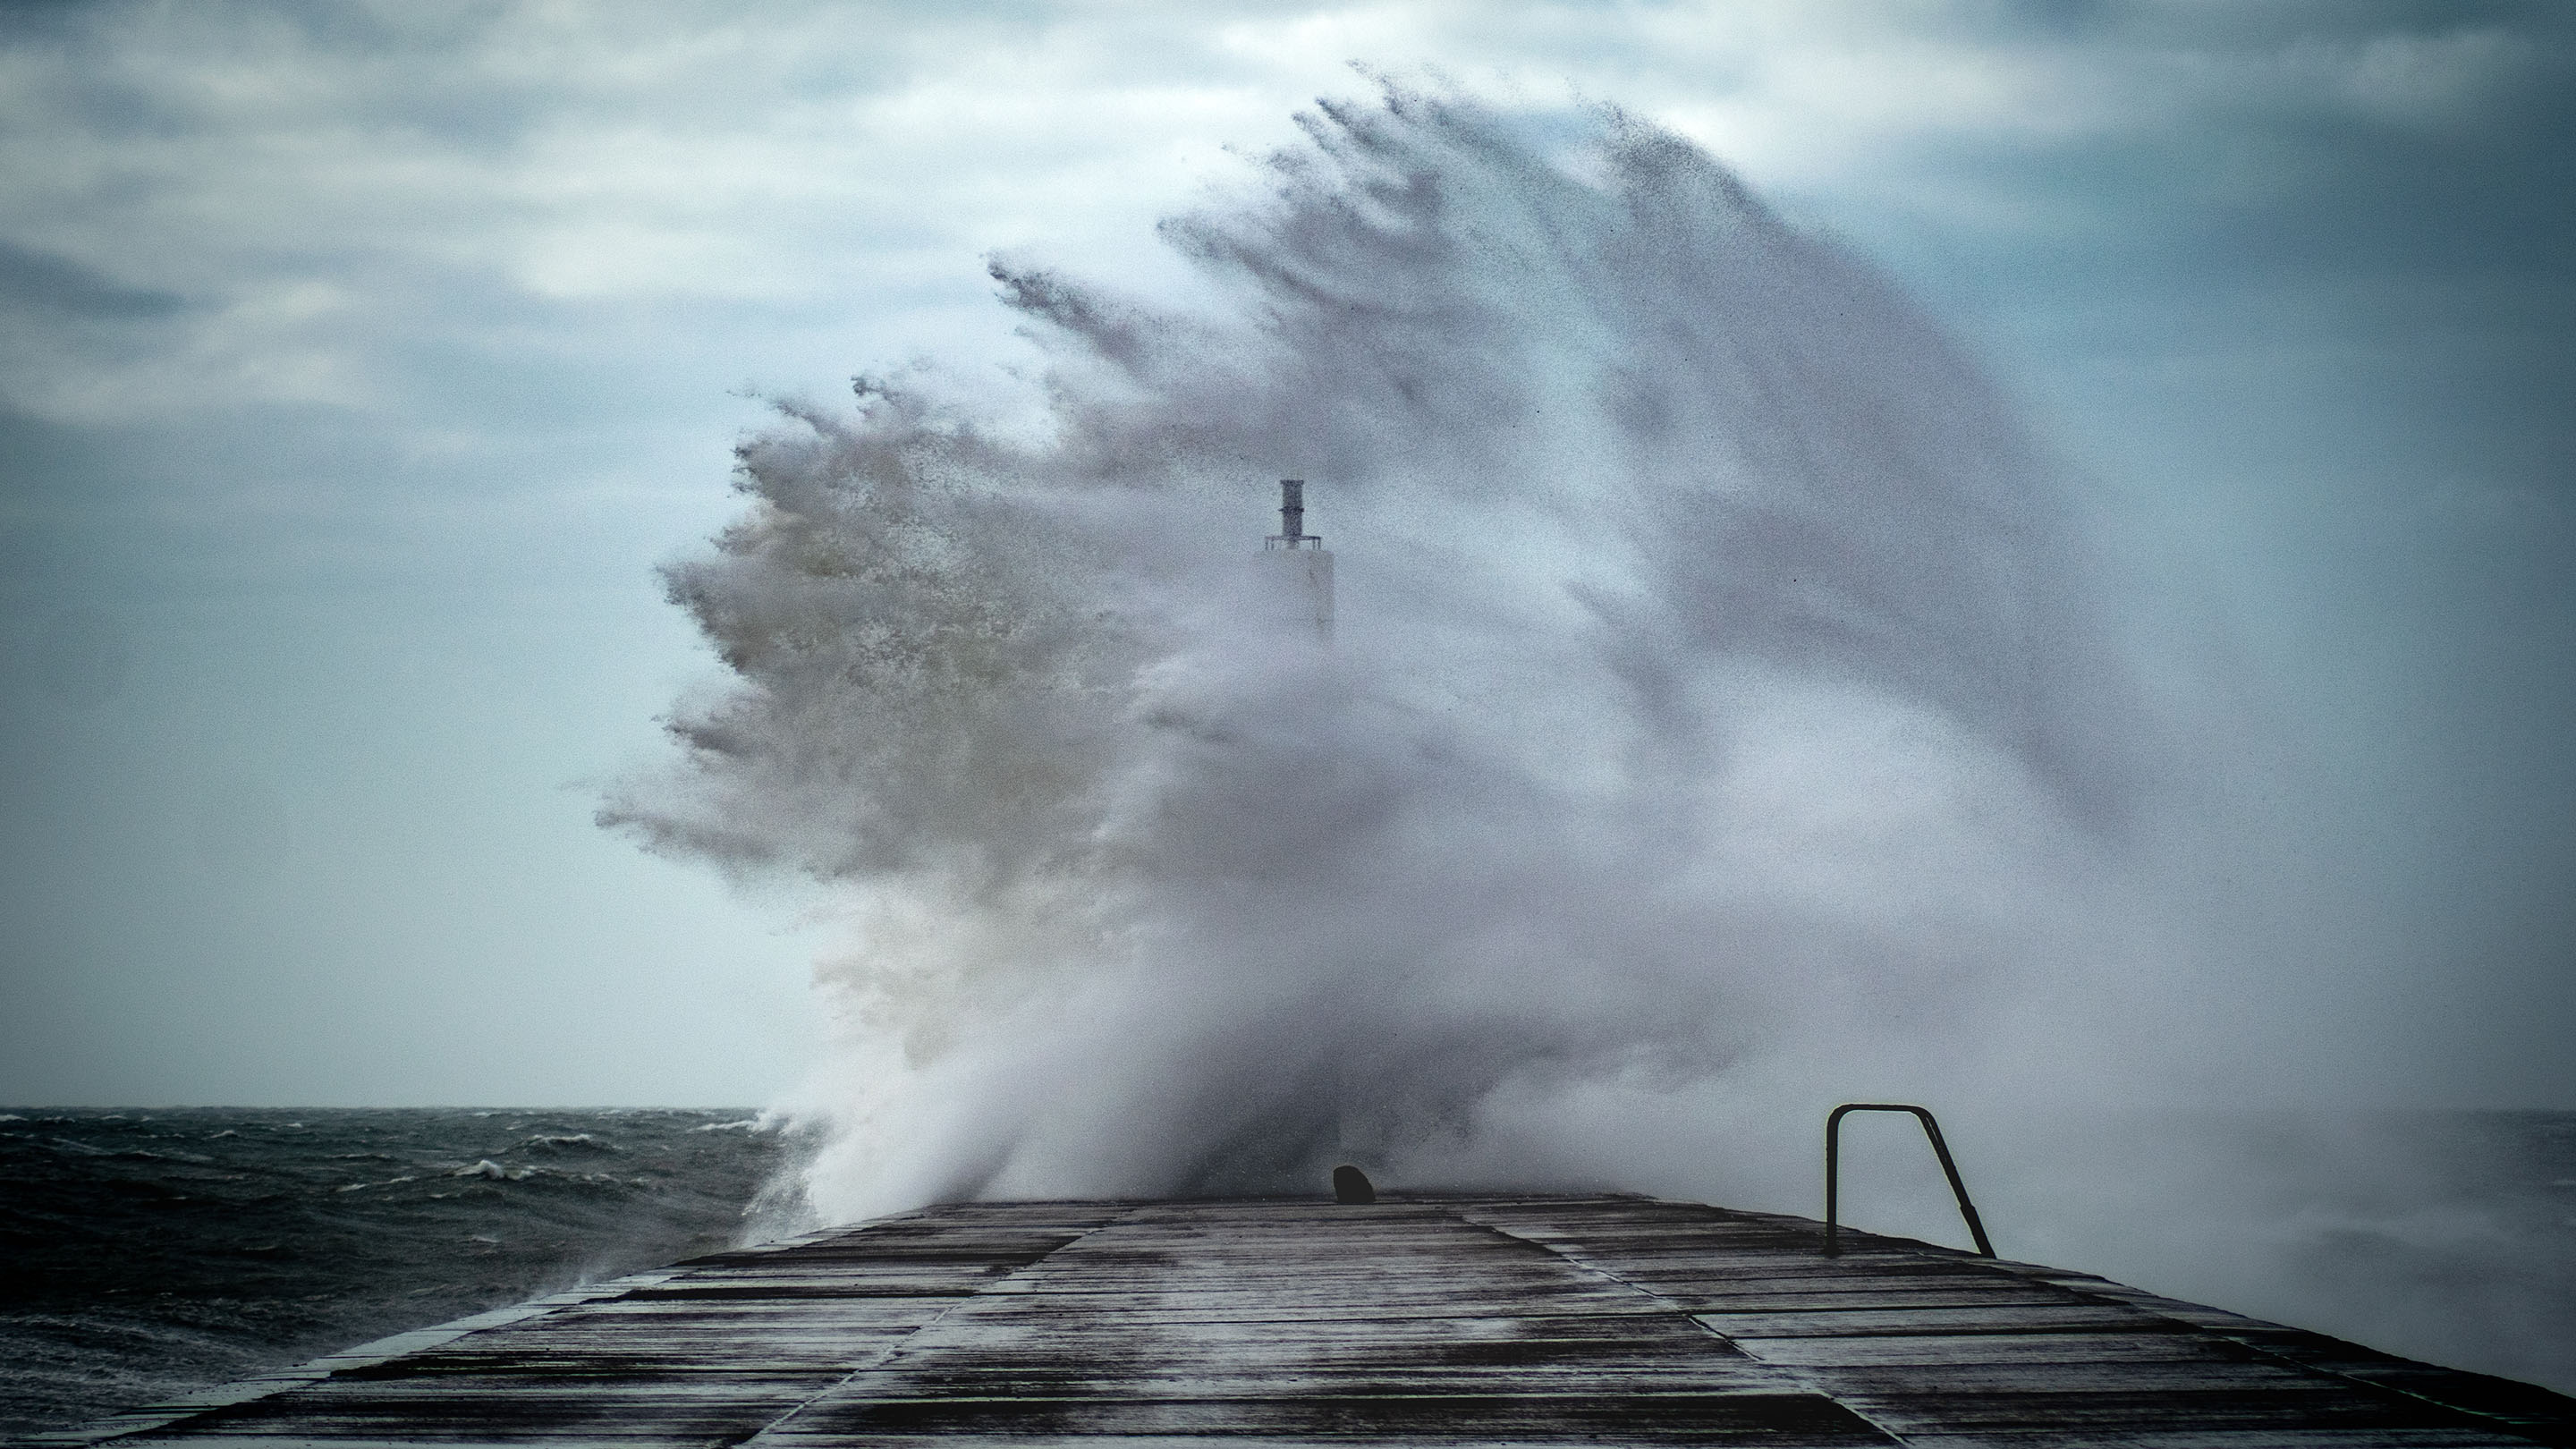 Strong winds create big waves that batter sea front during the Storm season